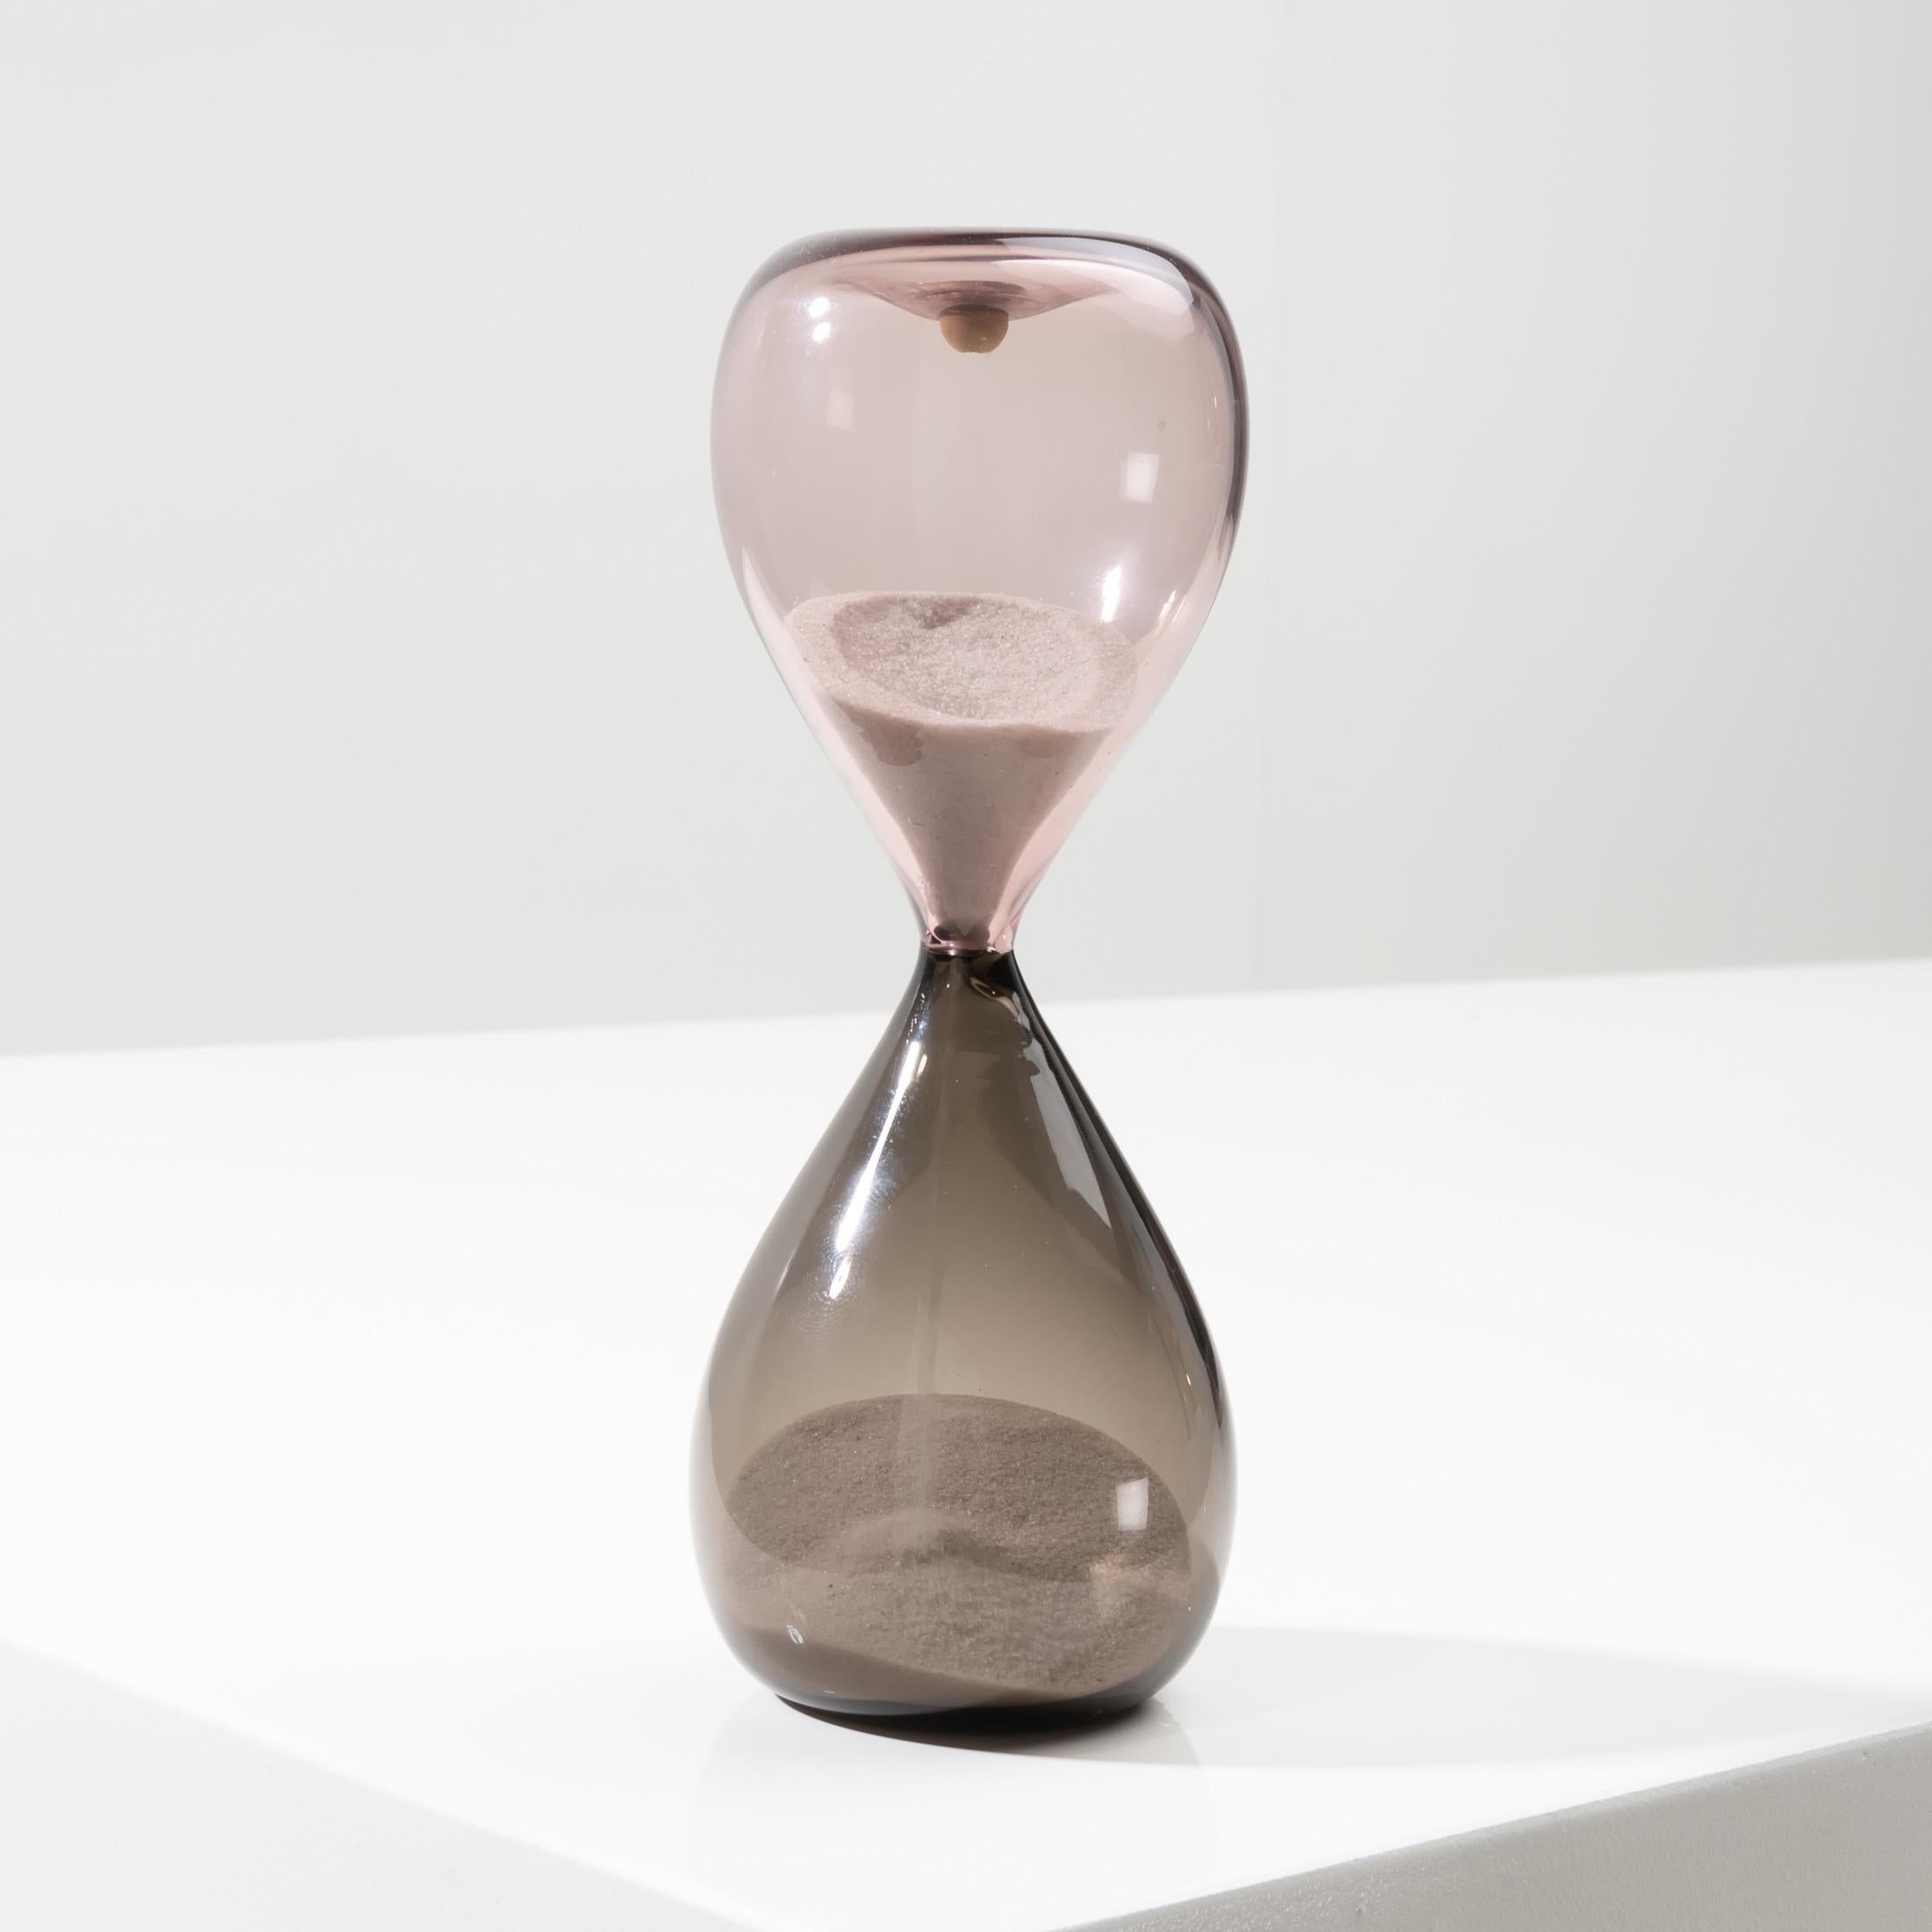 Two-tone blown glass hourglass (rose and grey).
The glass hourglasses designed by Paolo Venini in 1957 were exhibited at the XIth Milan Triennale the same year.
Ref. : Paolo Venini and his furnace, Marino Barovier and Carla Sonego, Skira. P.316